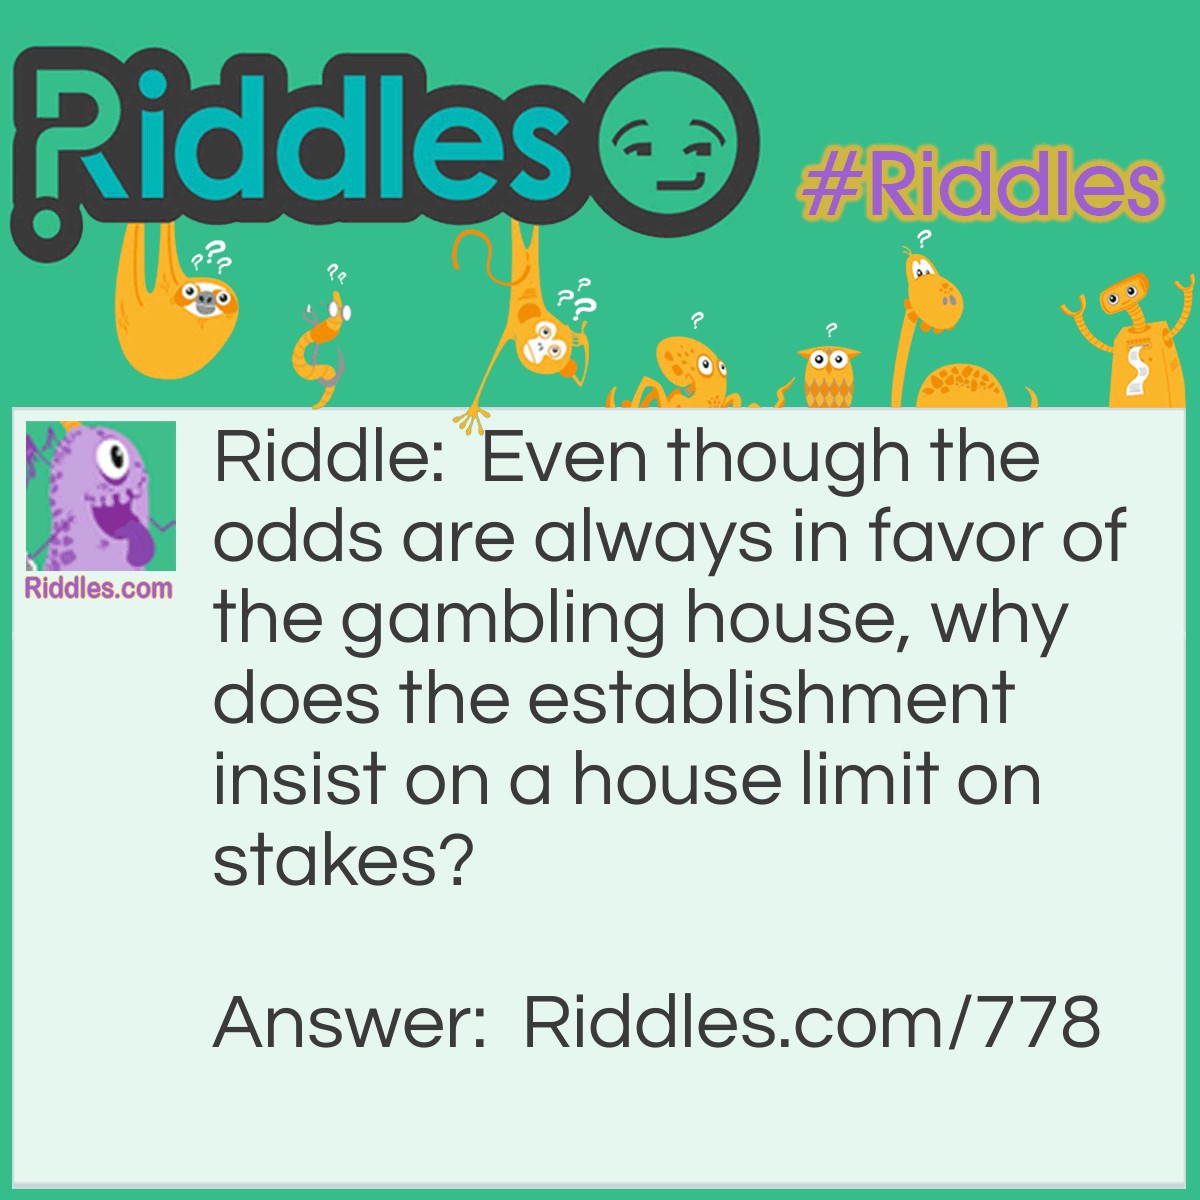 Riddle: Even though the odds are always in favor of the gambling house, why does the establishment insist on a house limit on stakes? Answer: Every casino in the world would go bankrupt without a house limit on stakes. Without it, gamblers would keep doubling their stakes until they won. No matter how bad a losing streak they were on, they would eventually win.